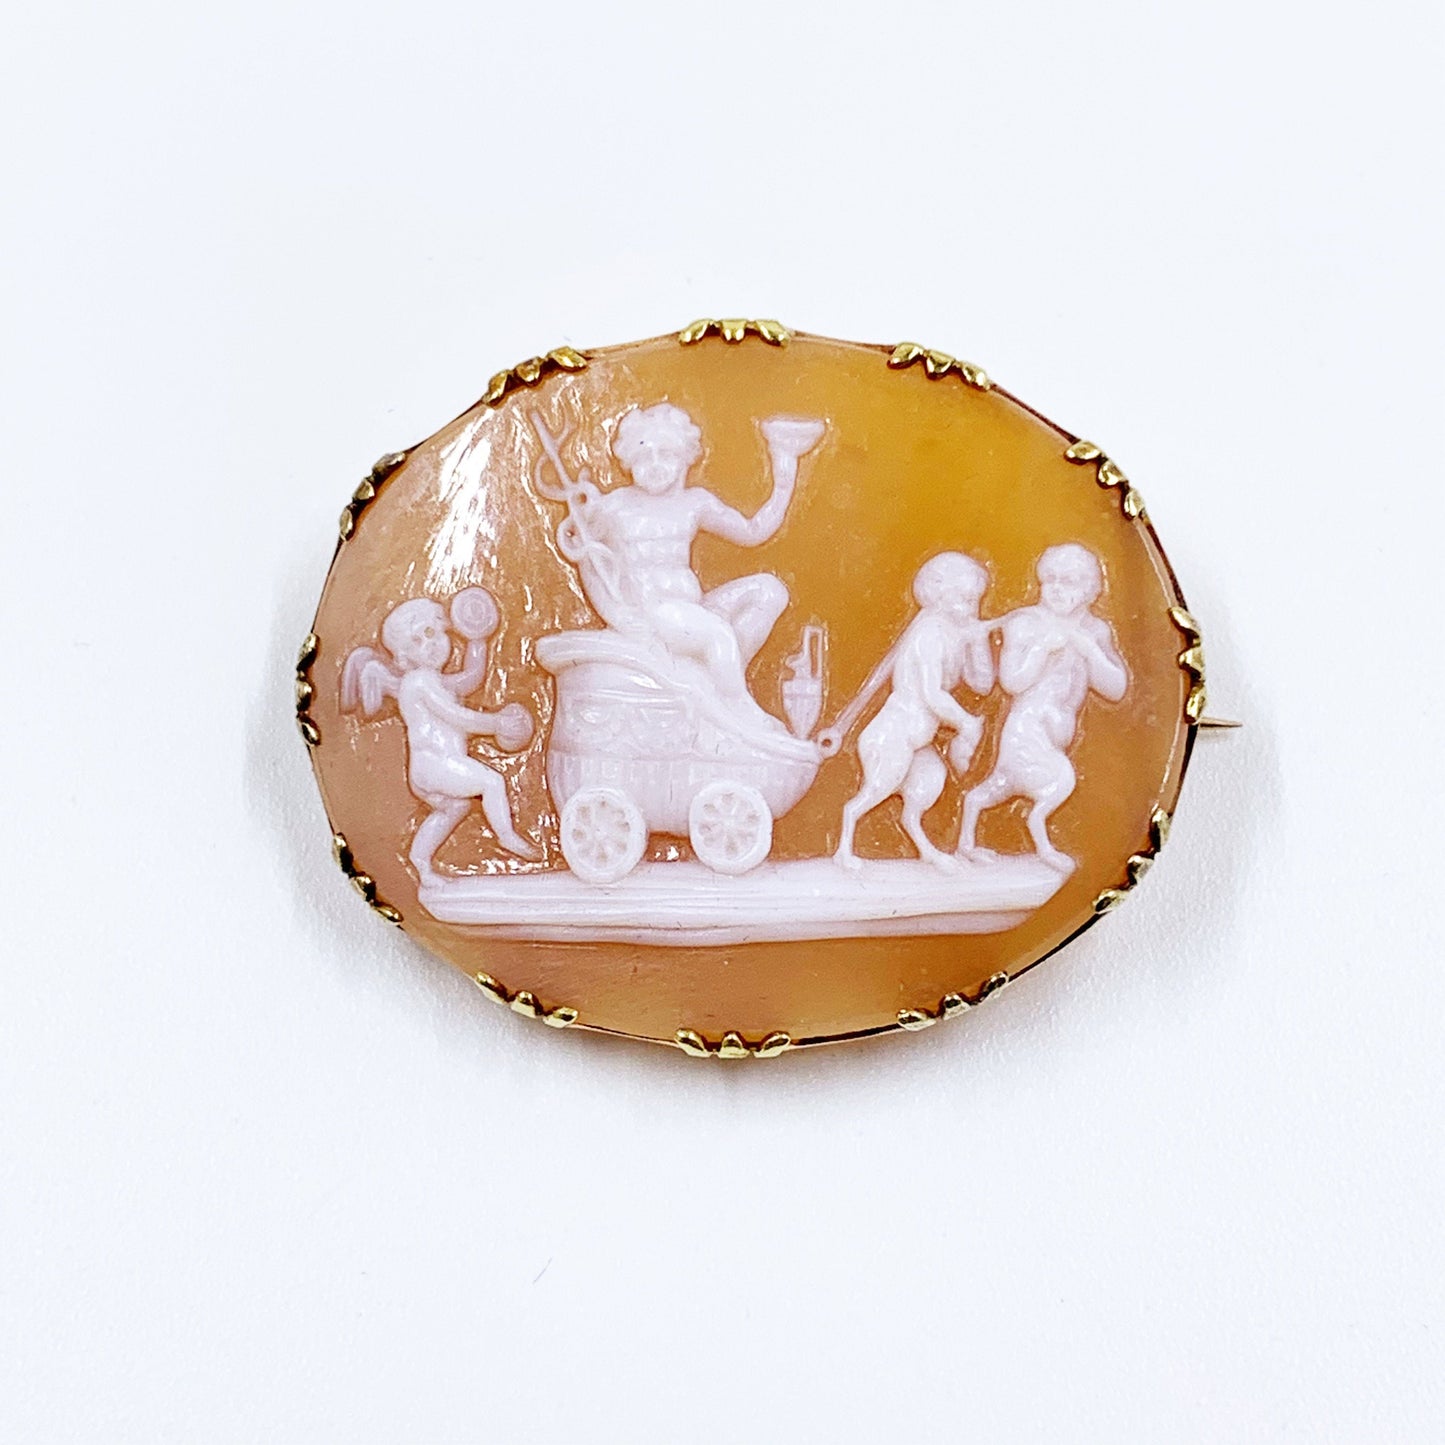 Antique 18k Shell Cameo Mythological Scene Brooch | The Triumph of Bacchus Cameo | Pictorial Mythology Cameo Brooch